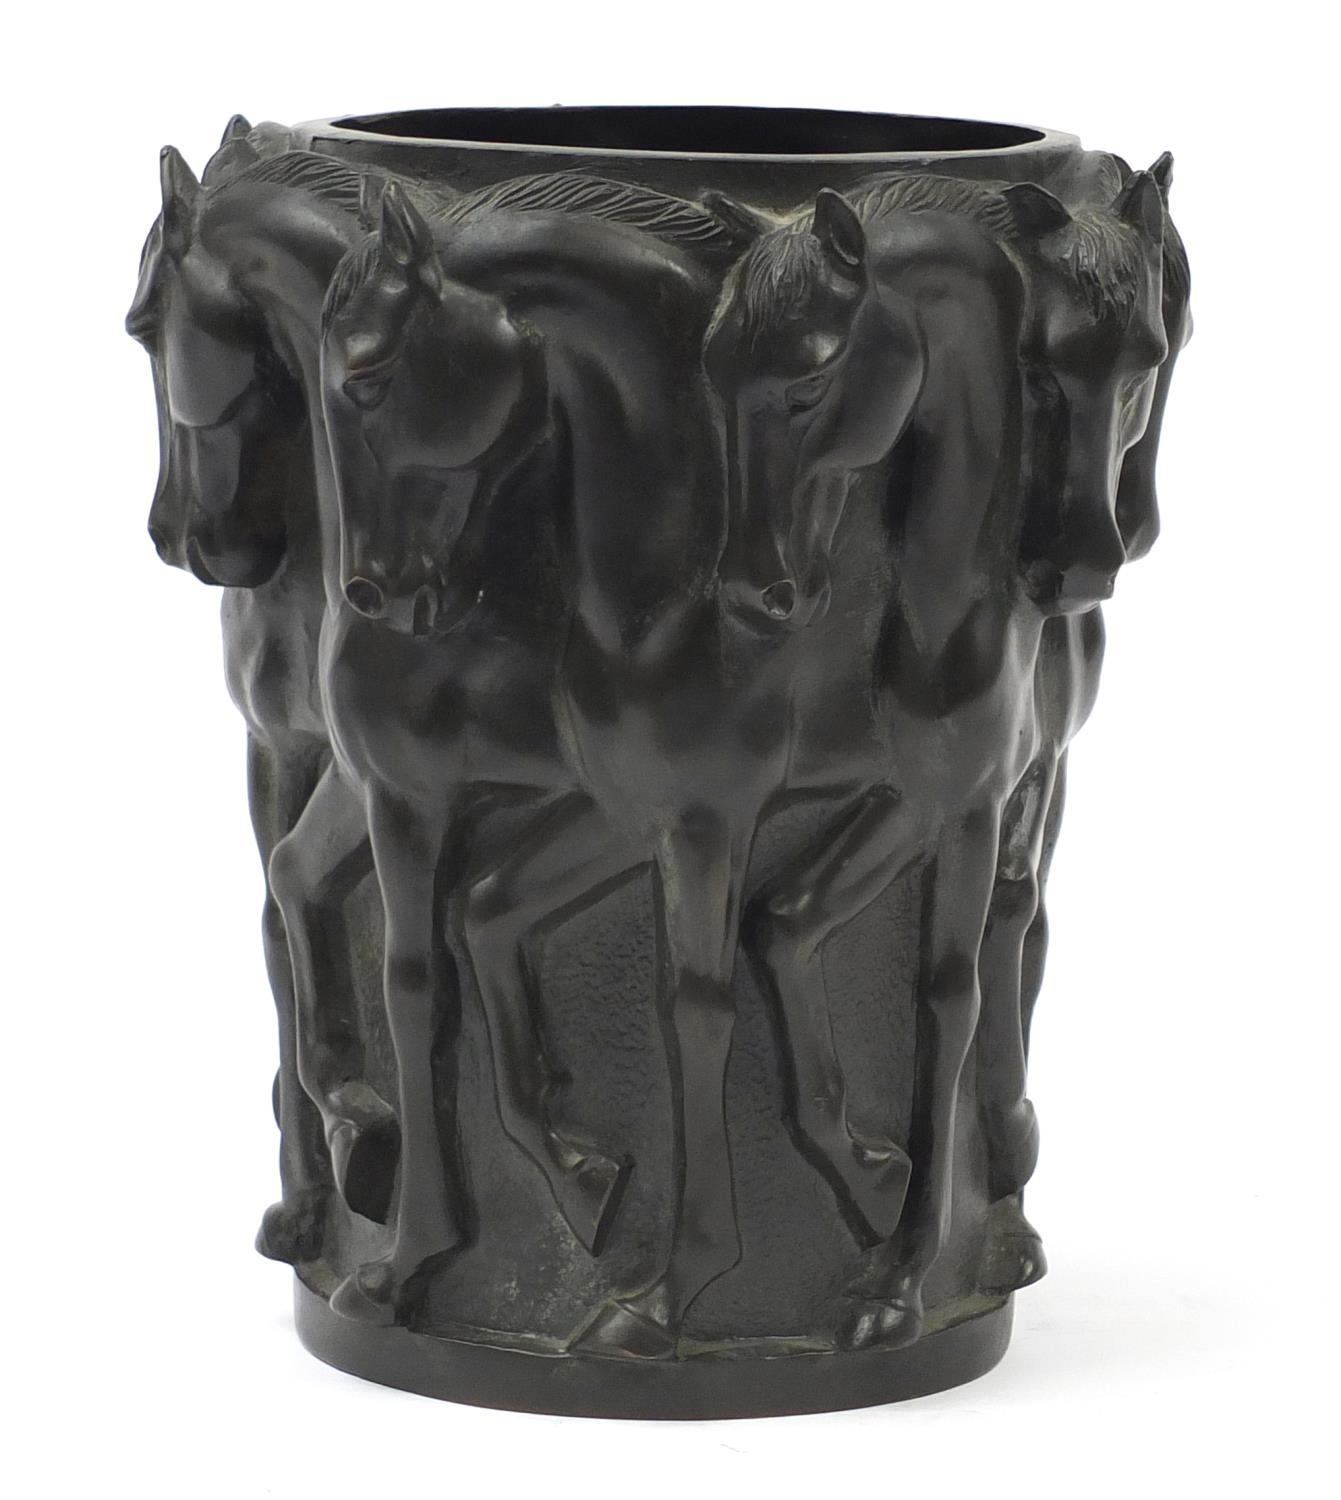 French Art Deco patinated bronze Maharajah thoroughbred wine cooler cast with a continuous band of - Image 5 of 8